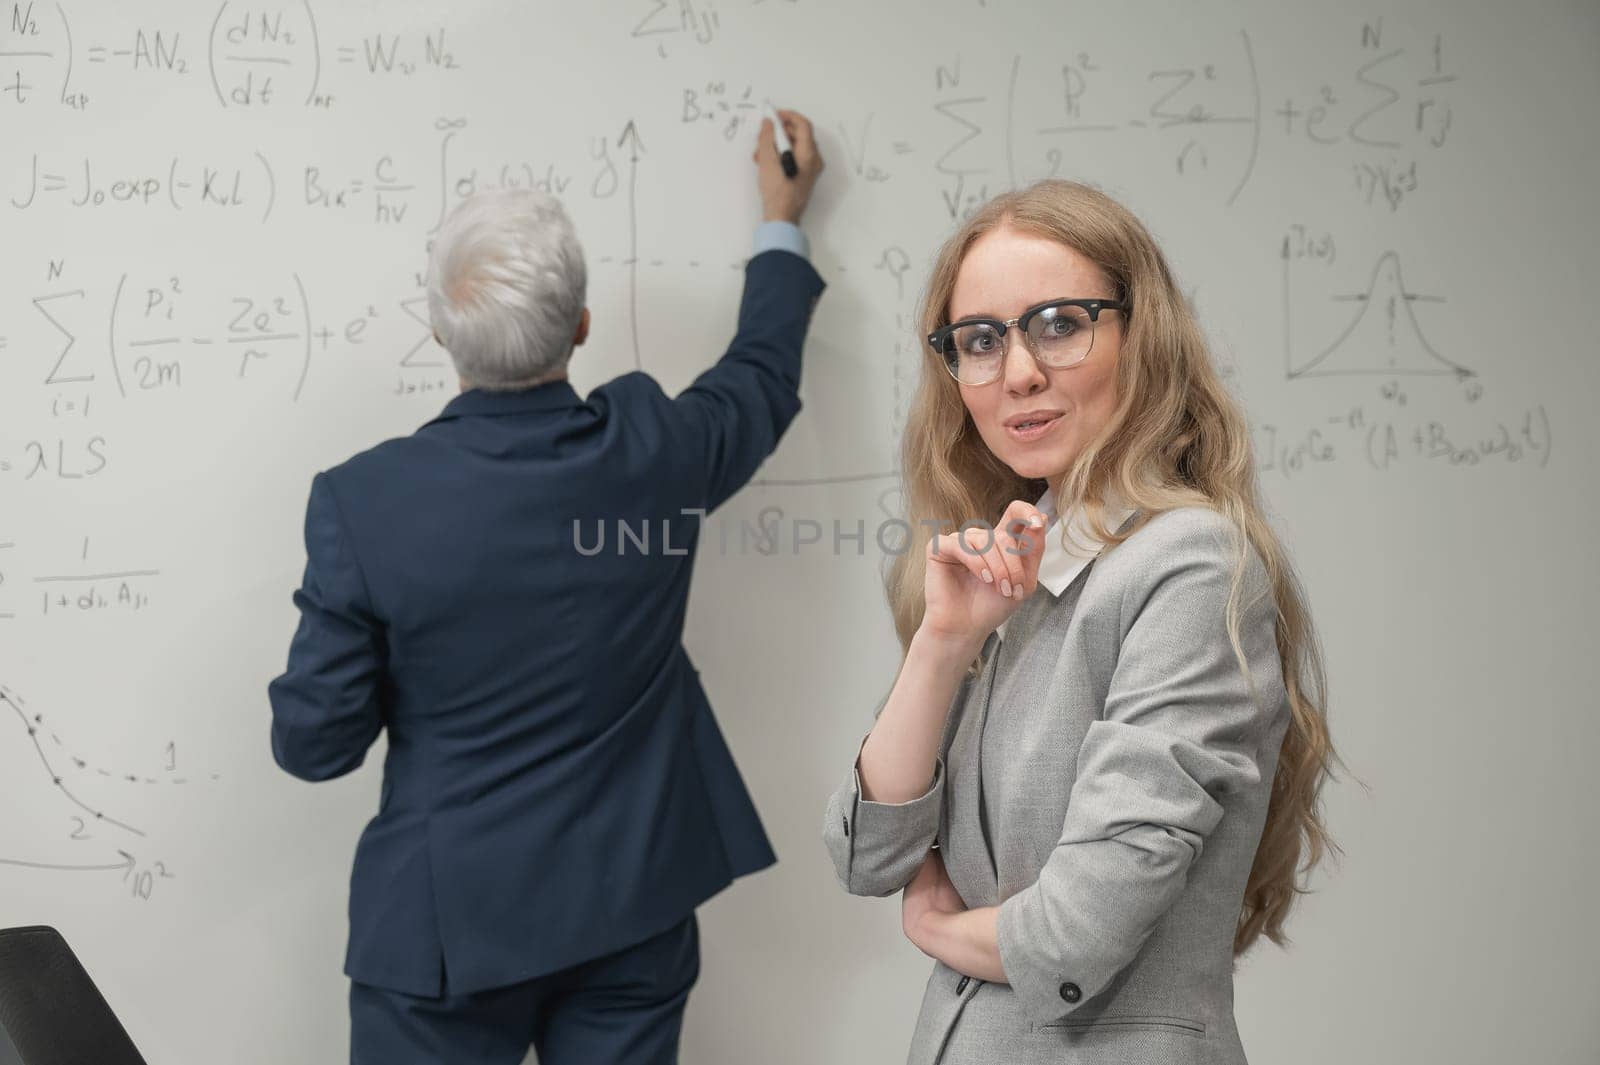 An elderly man writes on a white board and a young woman stands thoughtfully